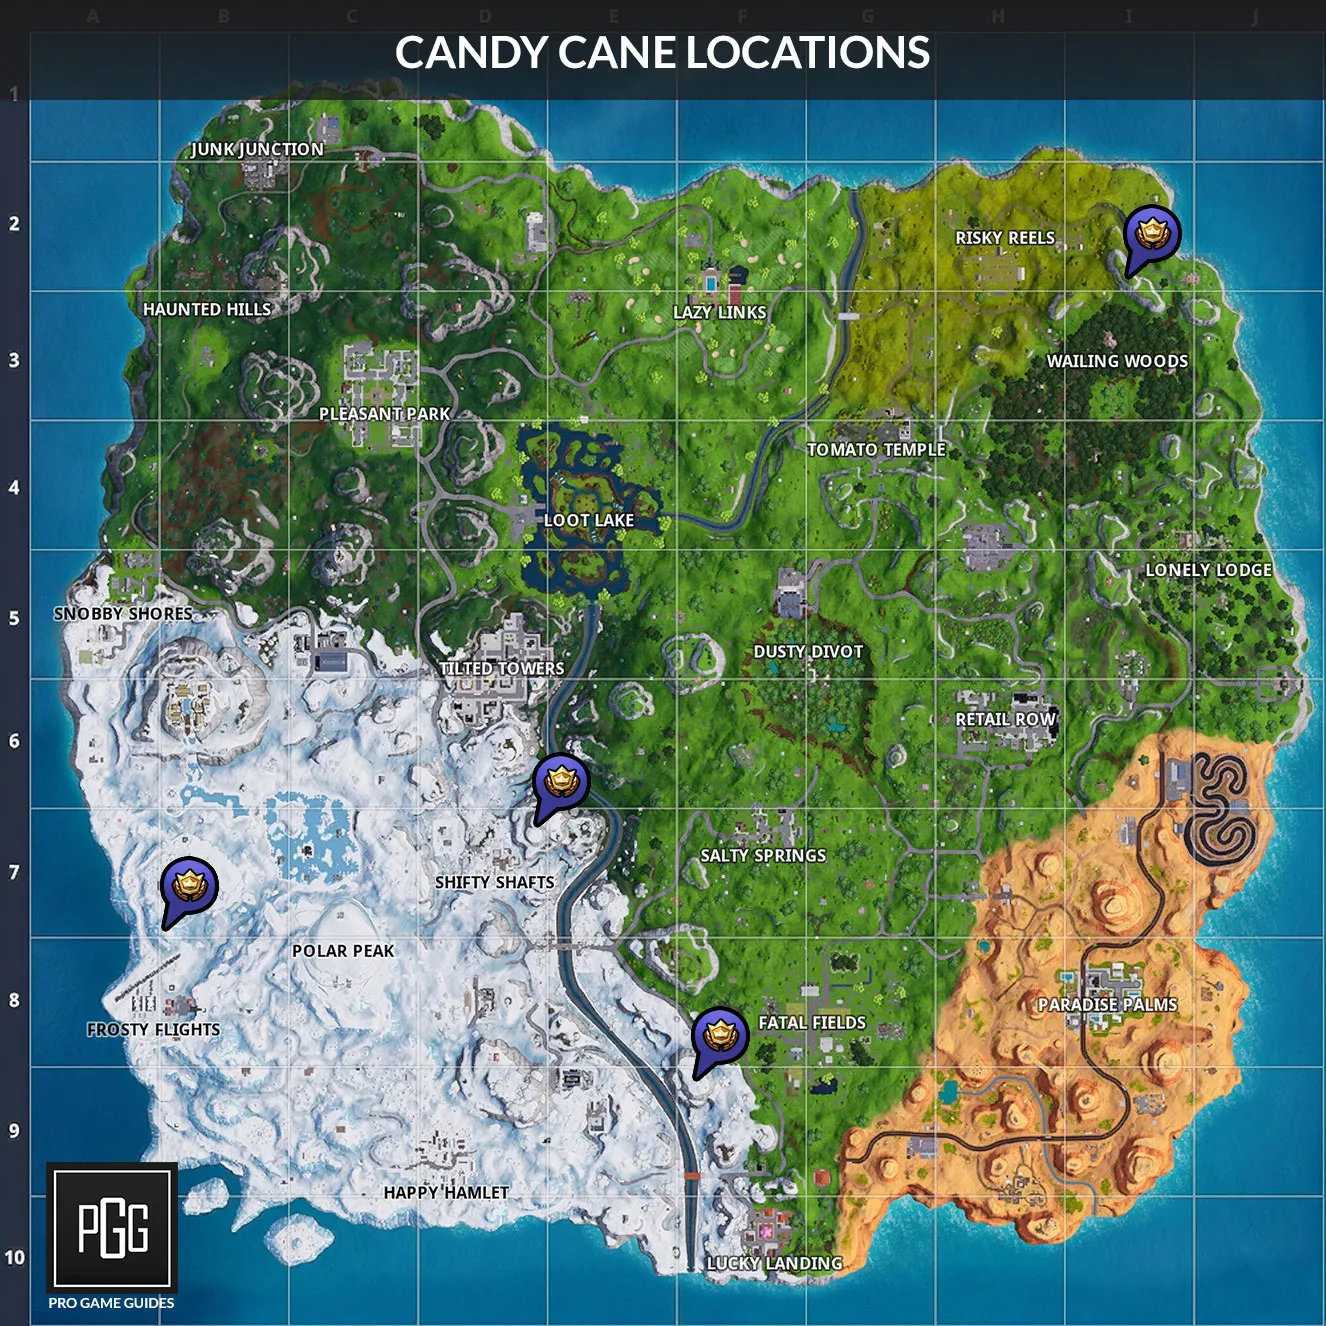 you ll just need to visit two of these candy canes to get your reward the reward for this challenge is the festive firefight loading screen - dubs fortnite cheating reddit